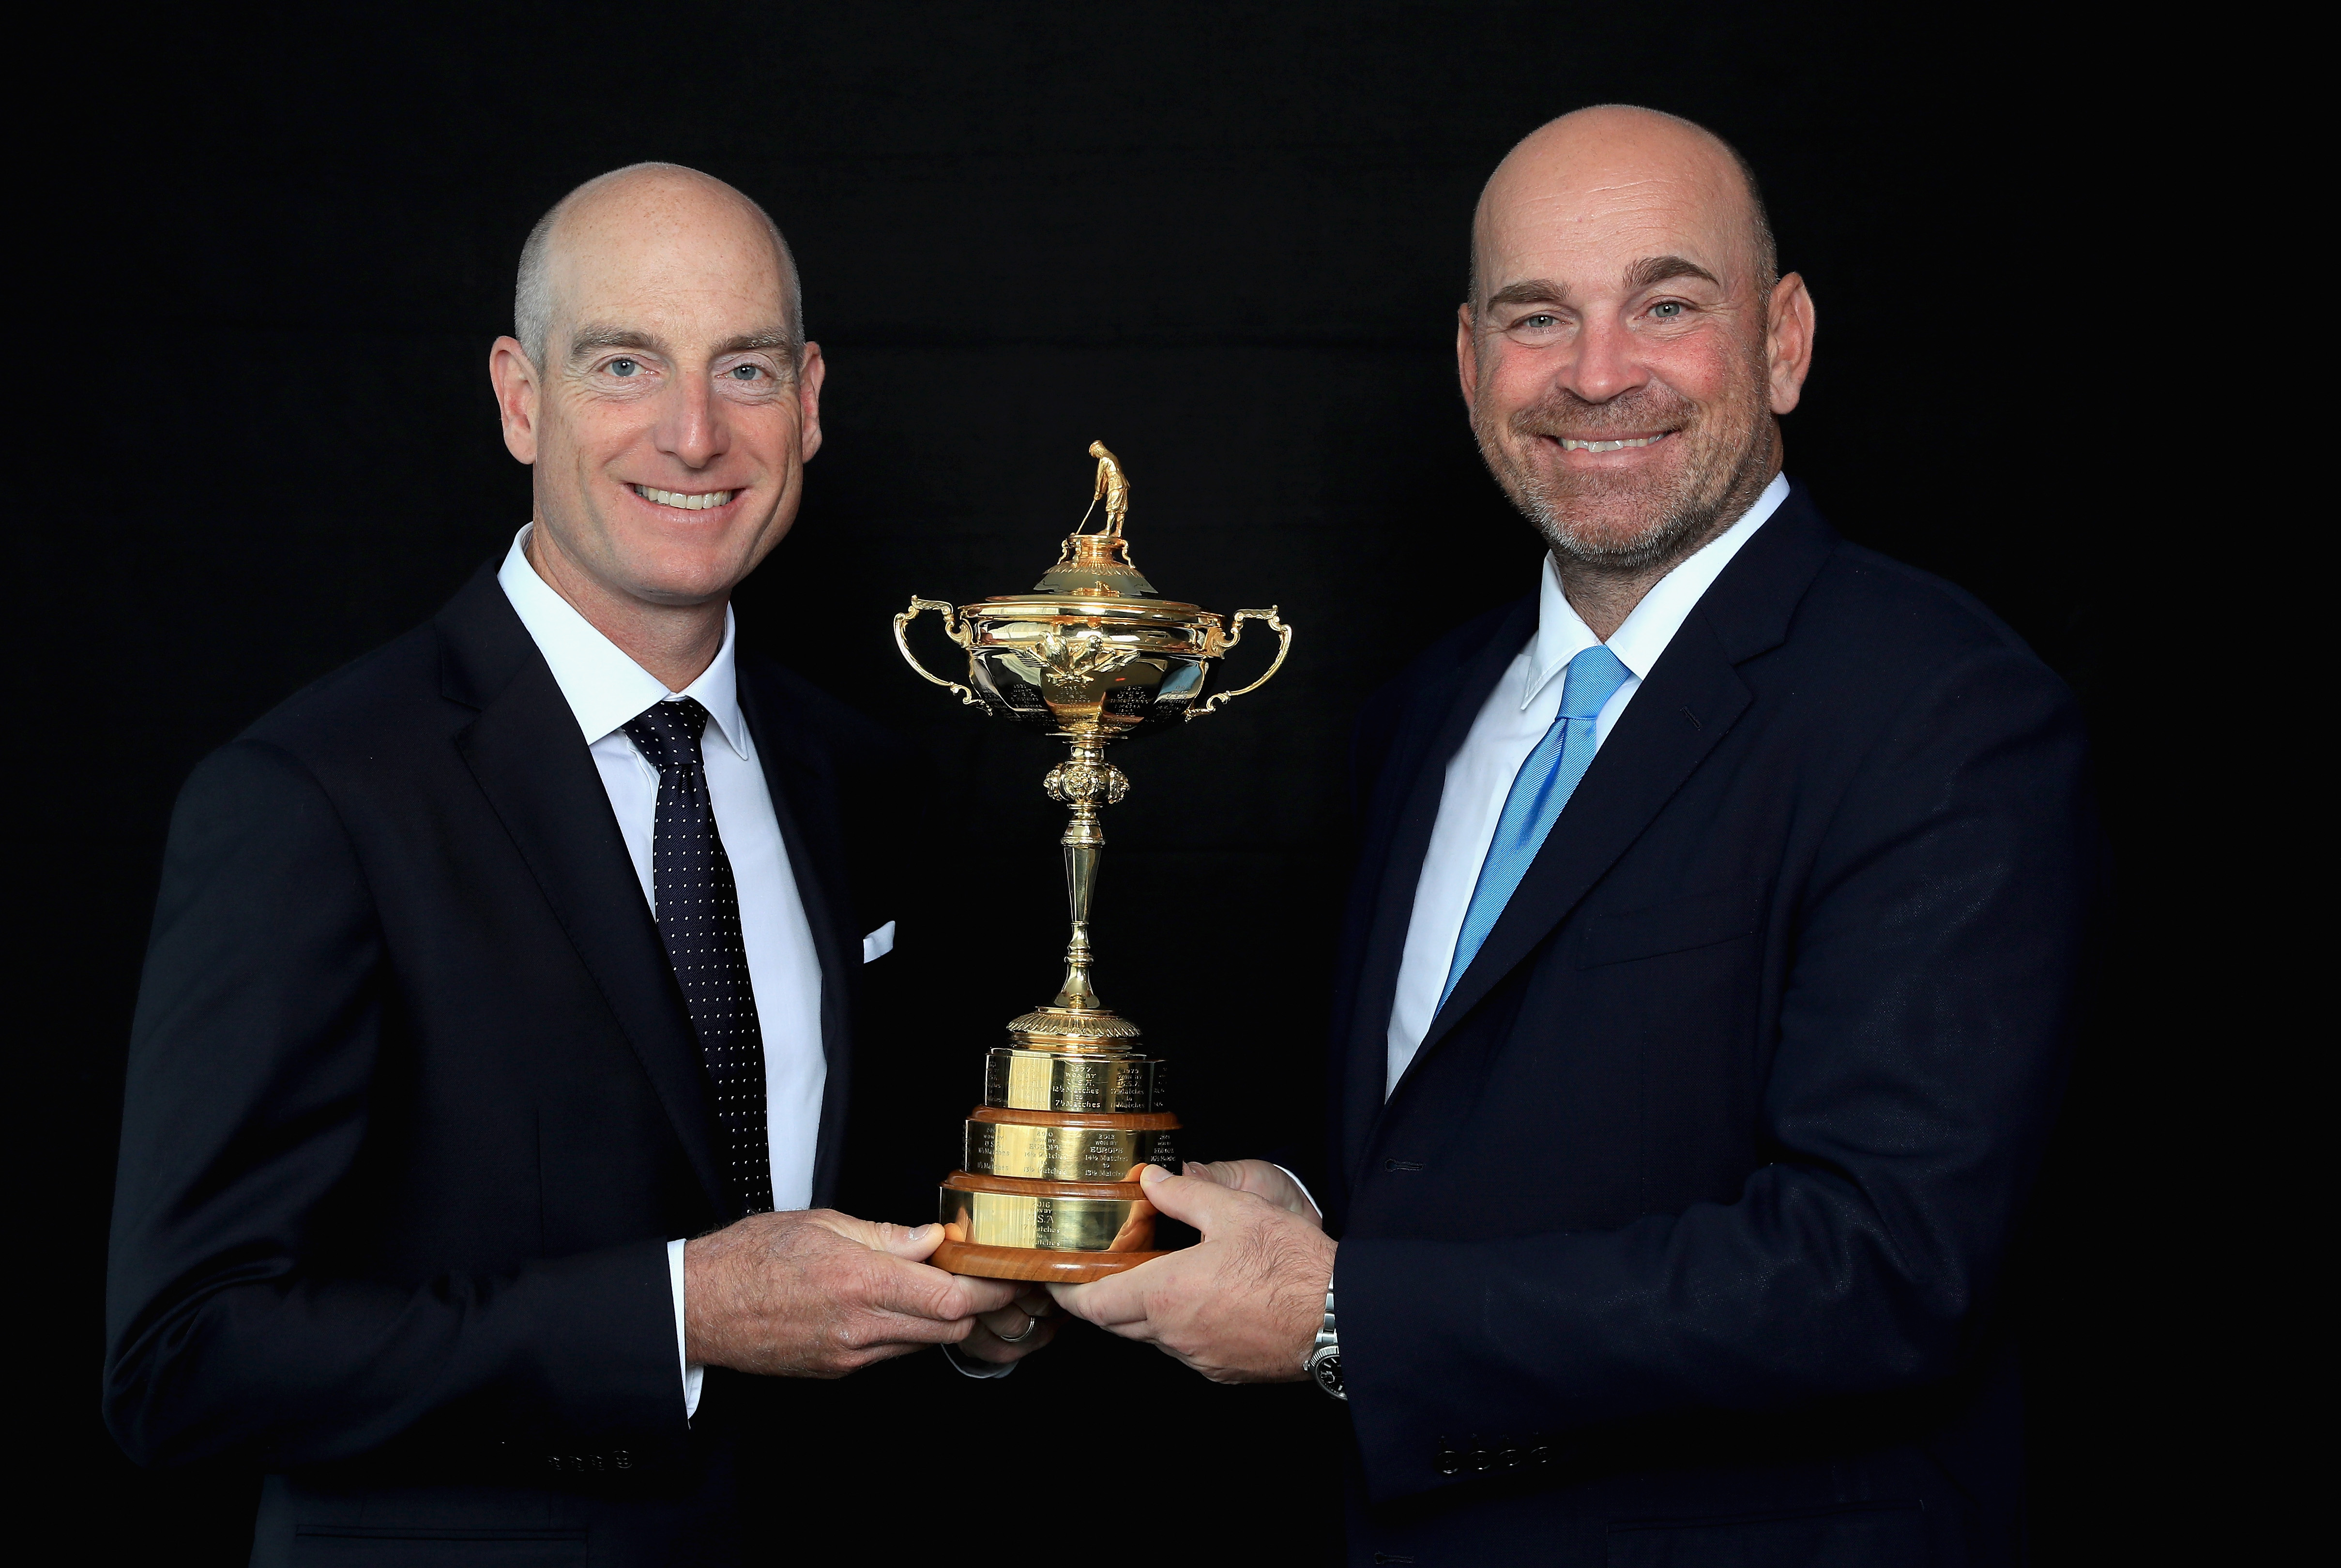 Rando withdraws name from European Ryder Cup Team consideration